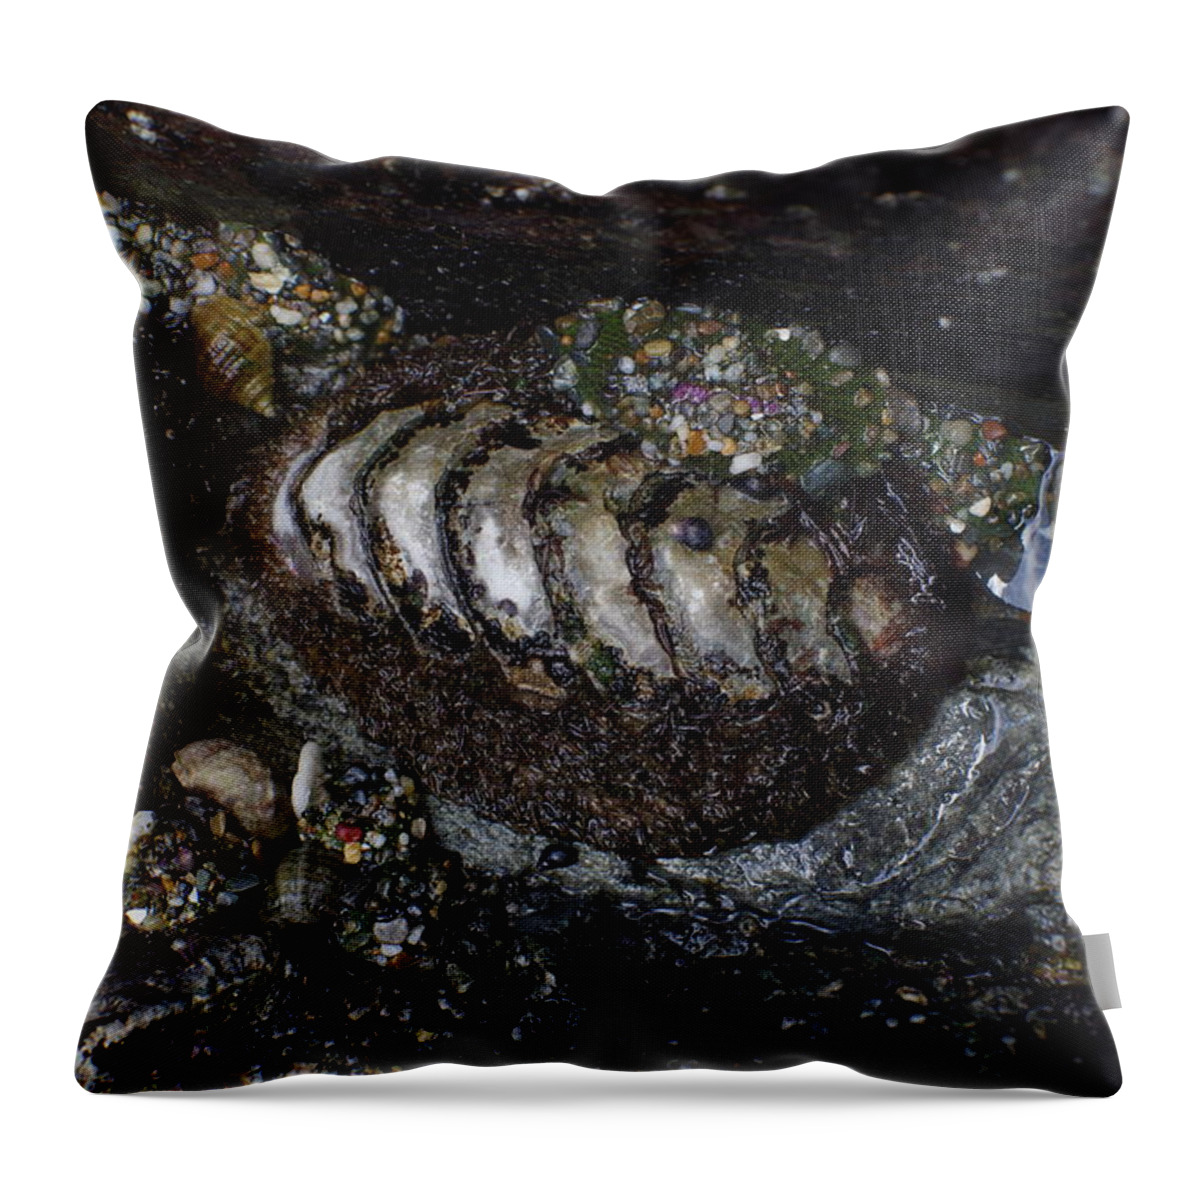  Throw Pillow featuring the photograph Seaweedy Chiton by Adria Trail